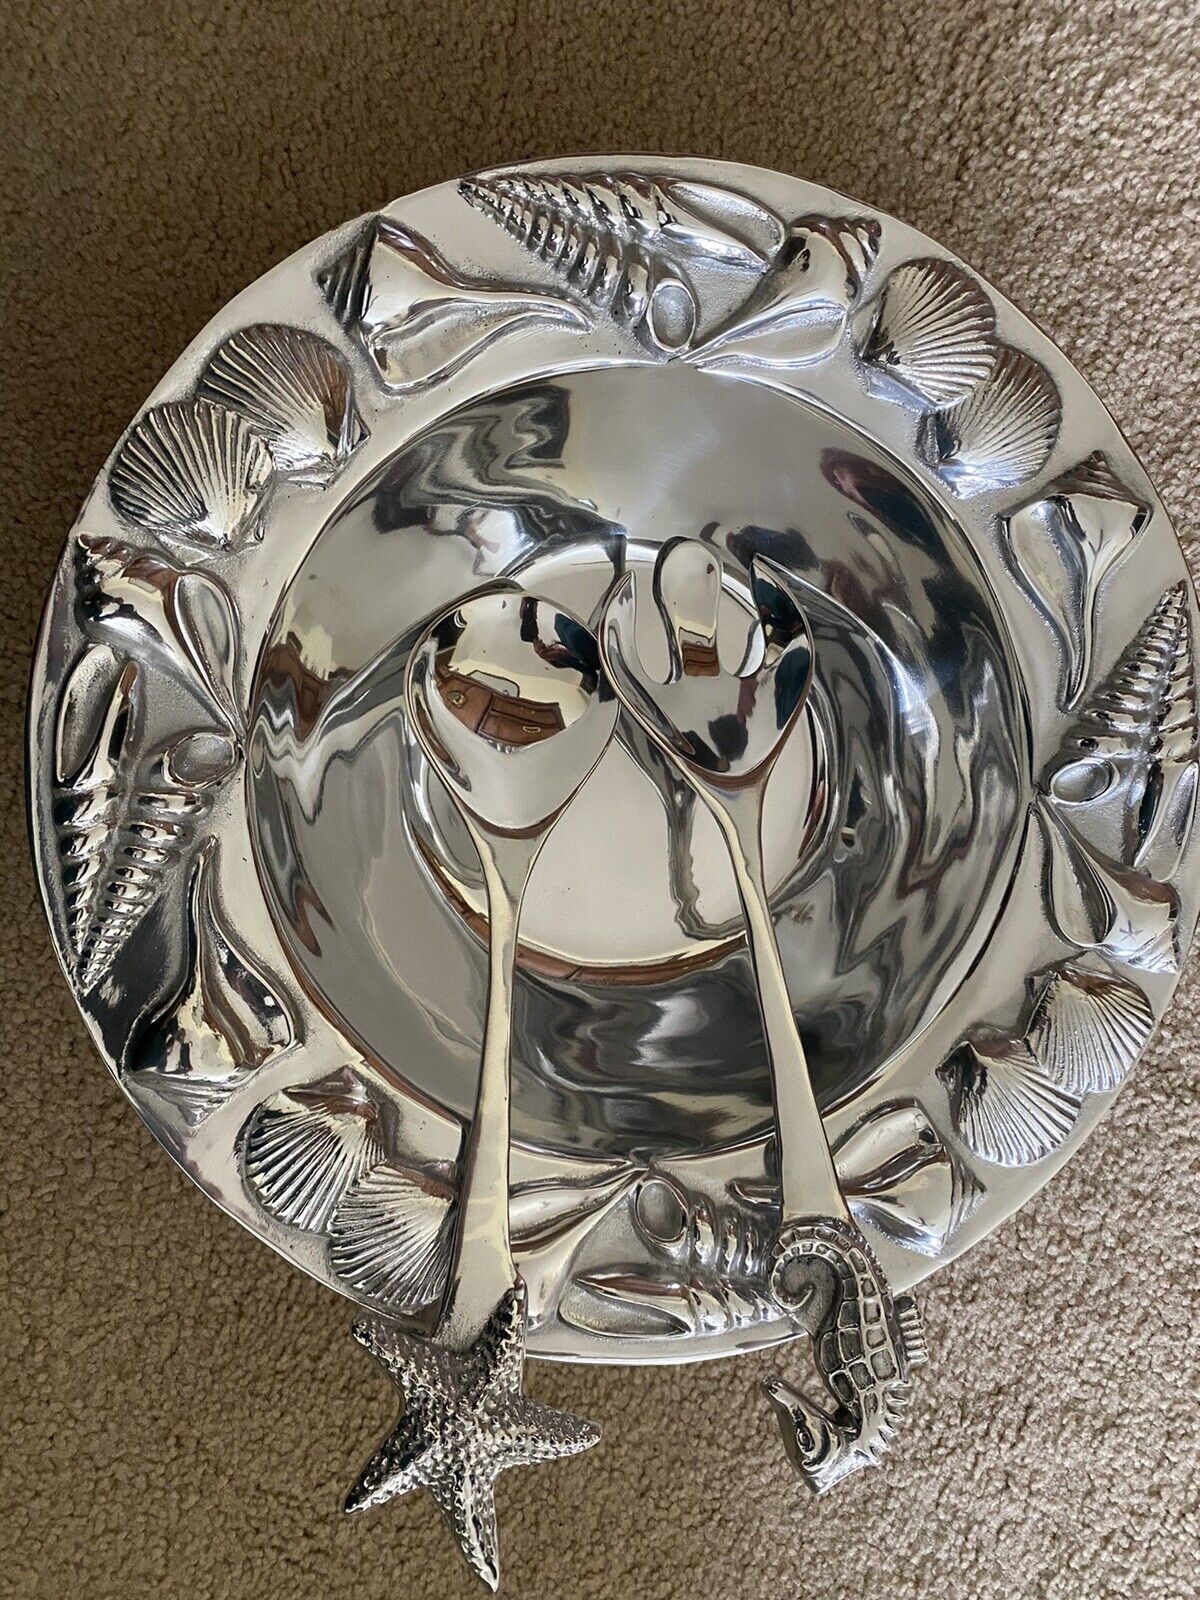 NEW Mariposa Brillante 1993 Large Metal Serving Bowl & Utensils Made In Mexico